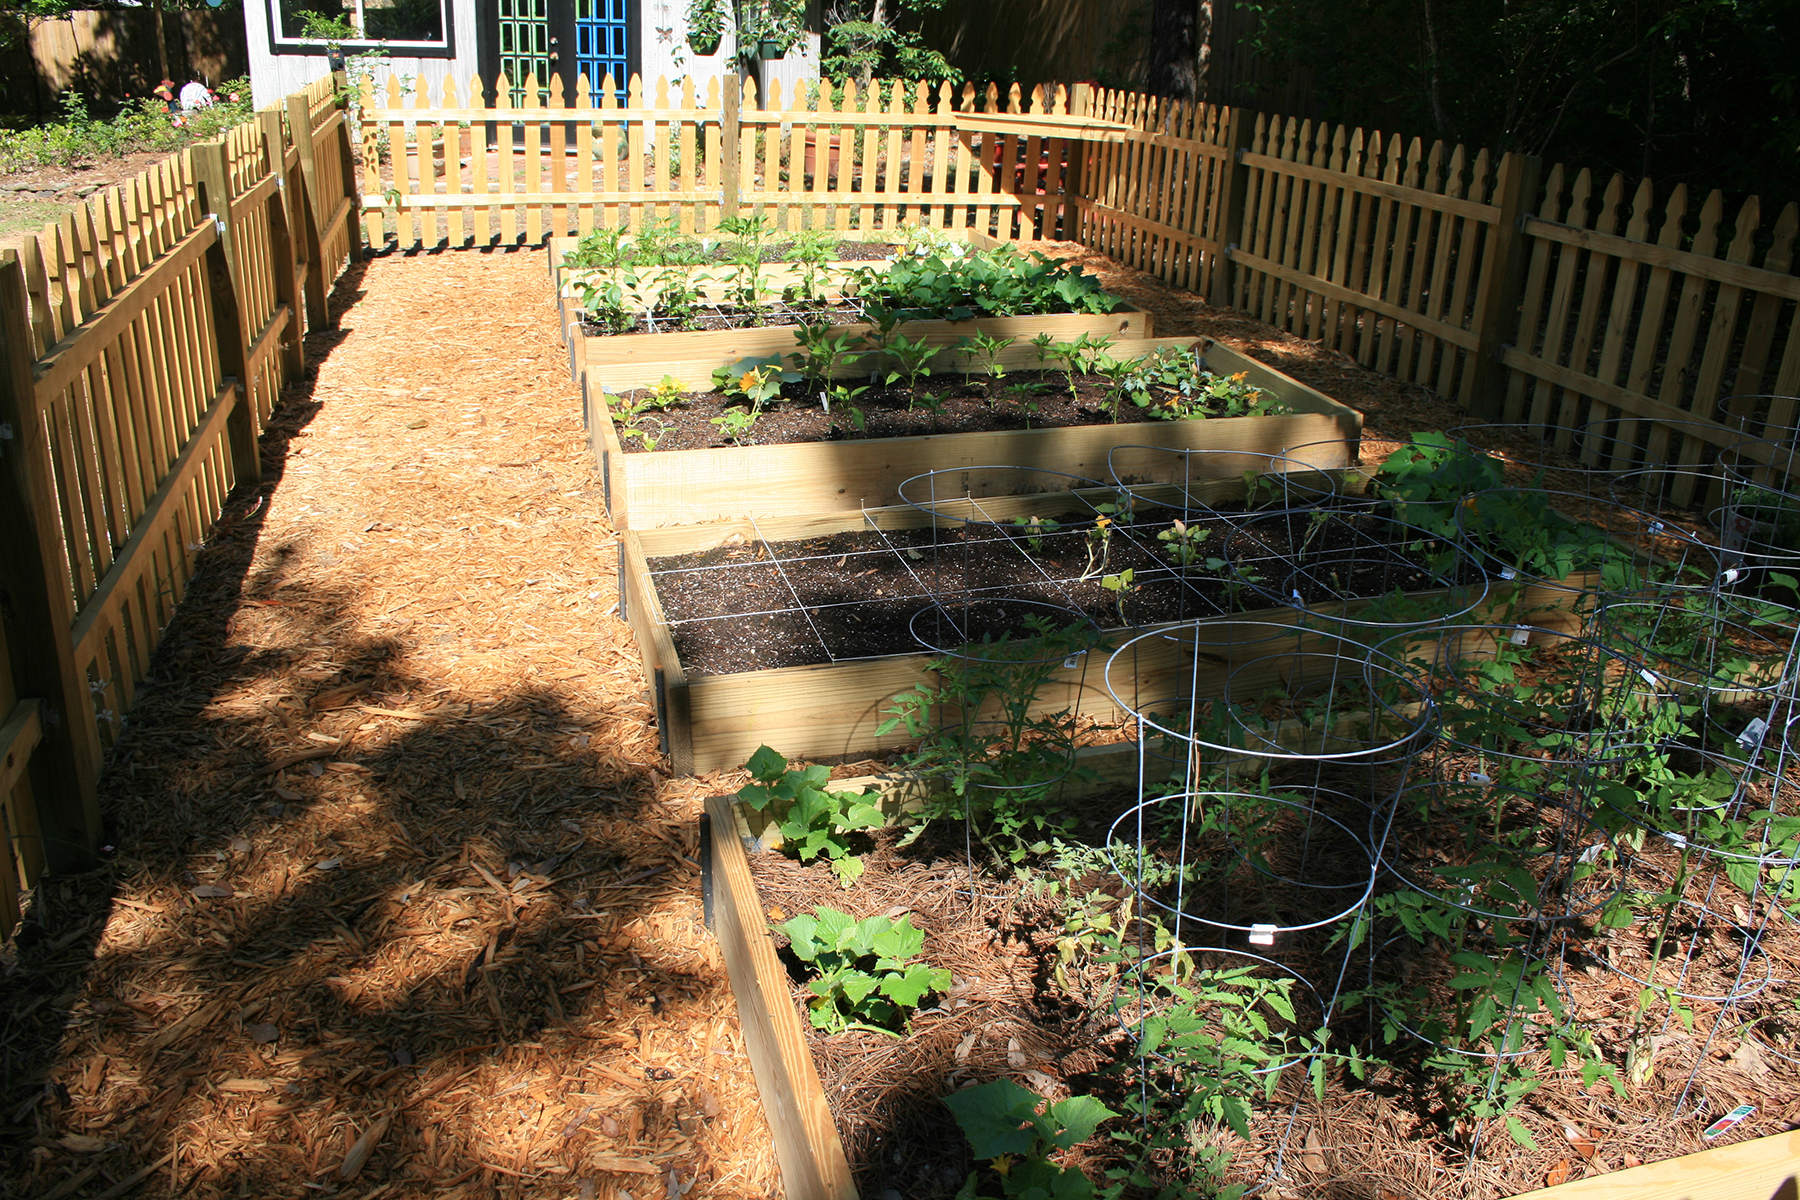 Raised beds constructed using two-by-six boards creates a neat and ordered look to the garden.